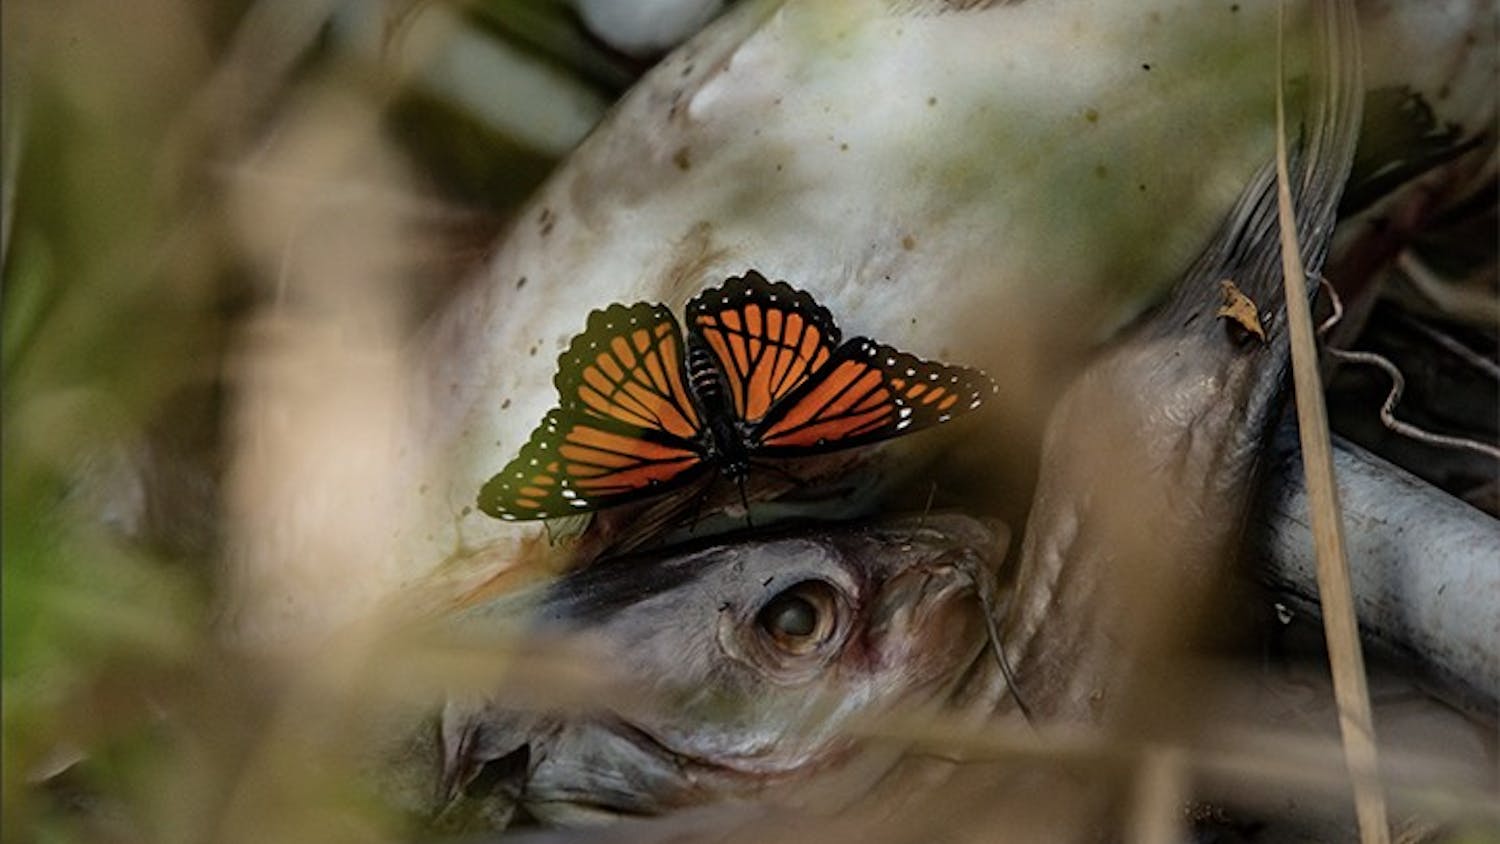 A butterfly sitting on a dead fish that washed up from the river.